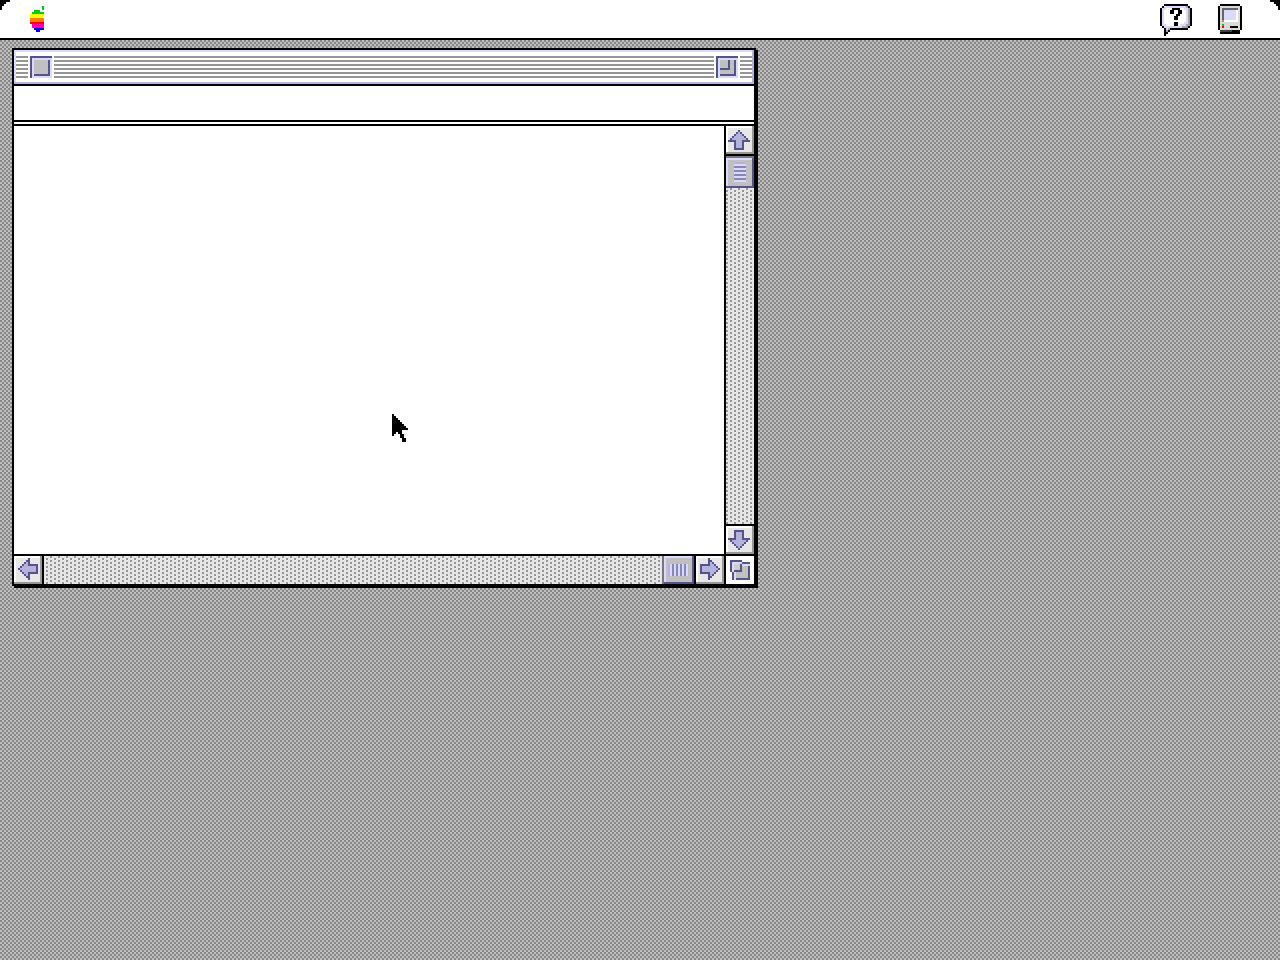 System 7 Finder window with no text or icons drawn